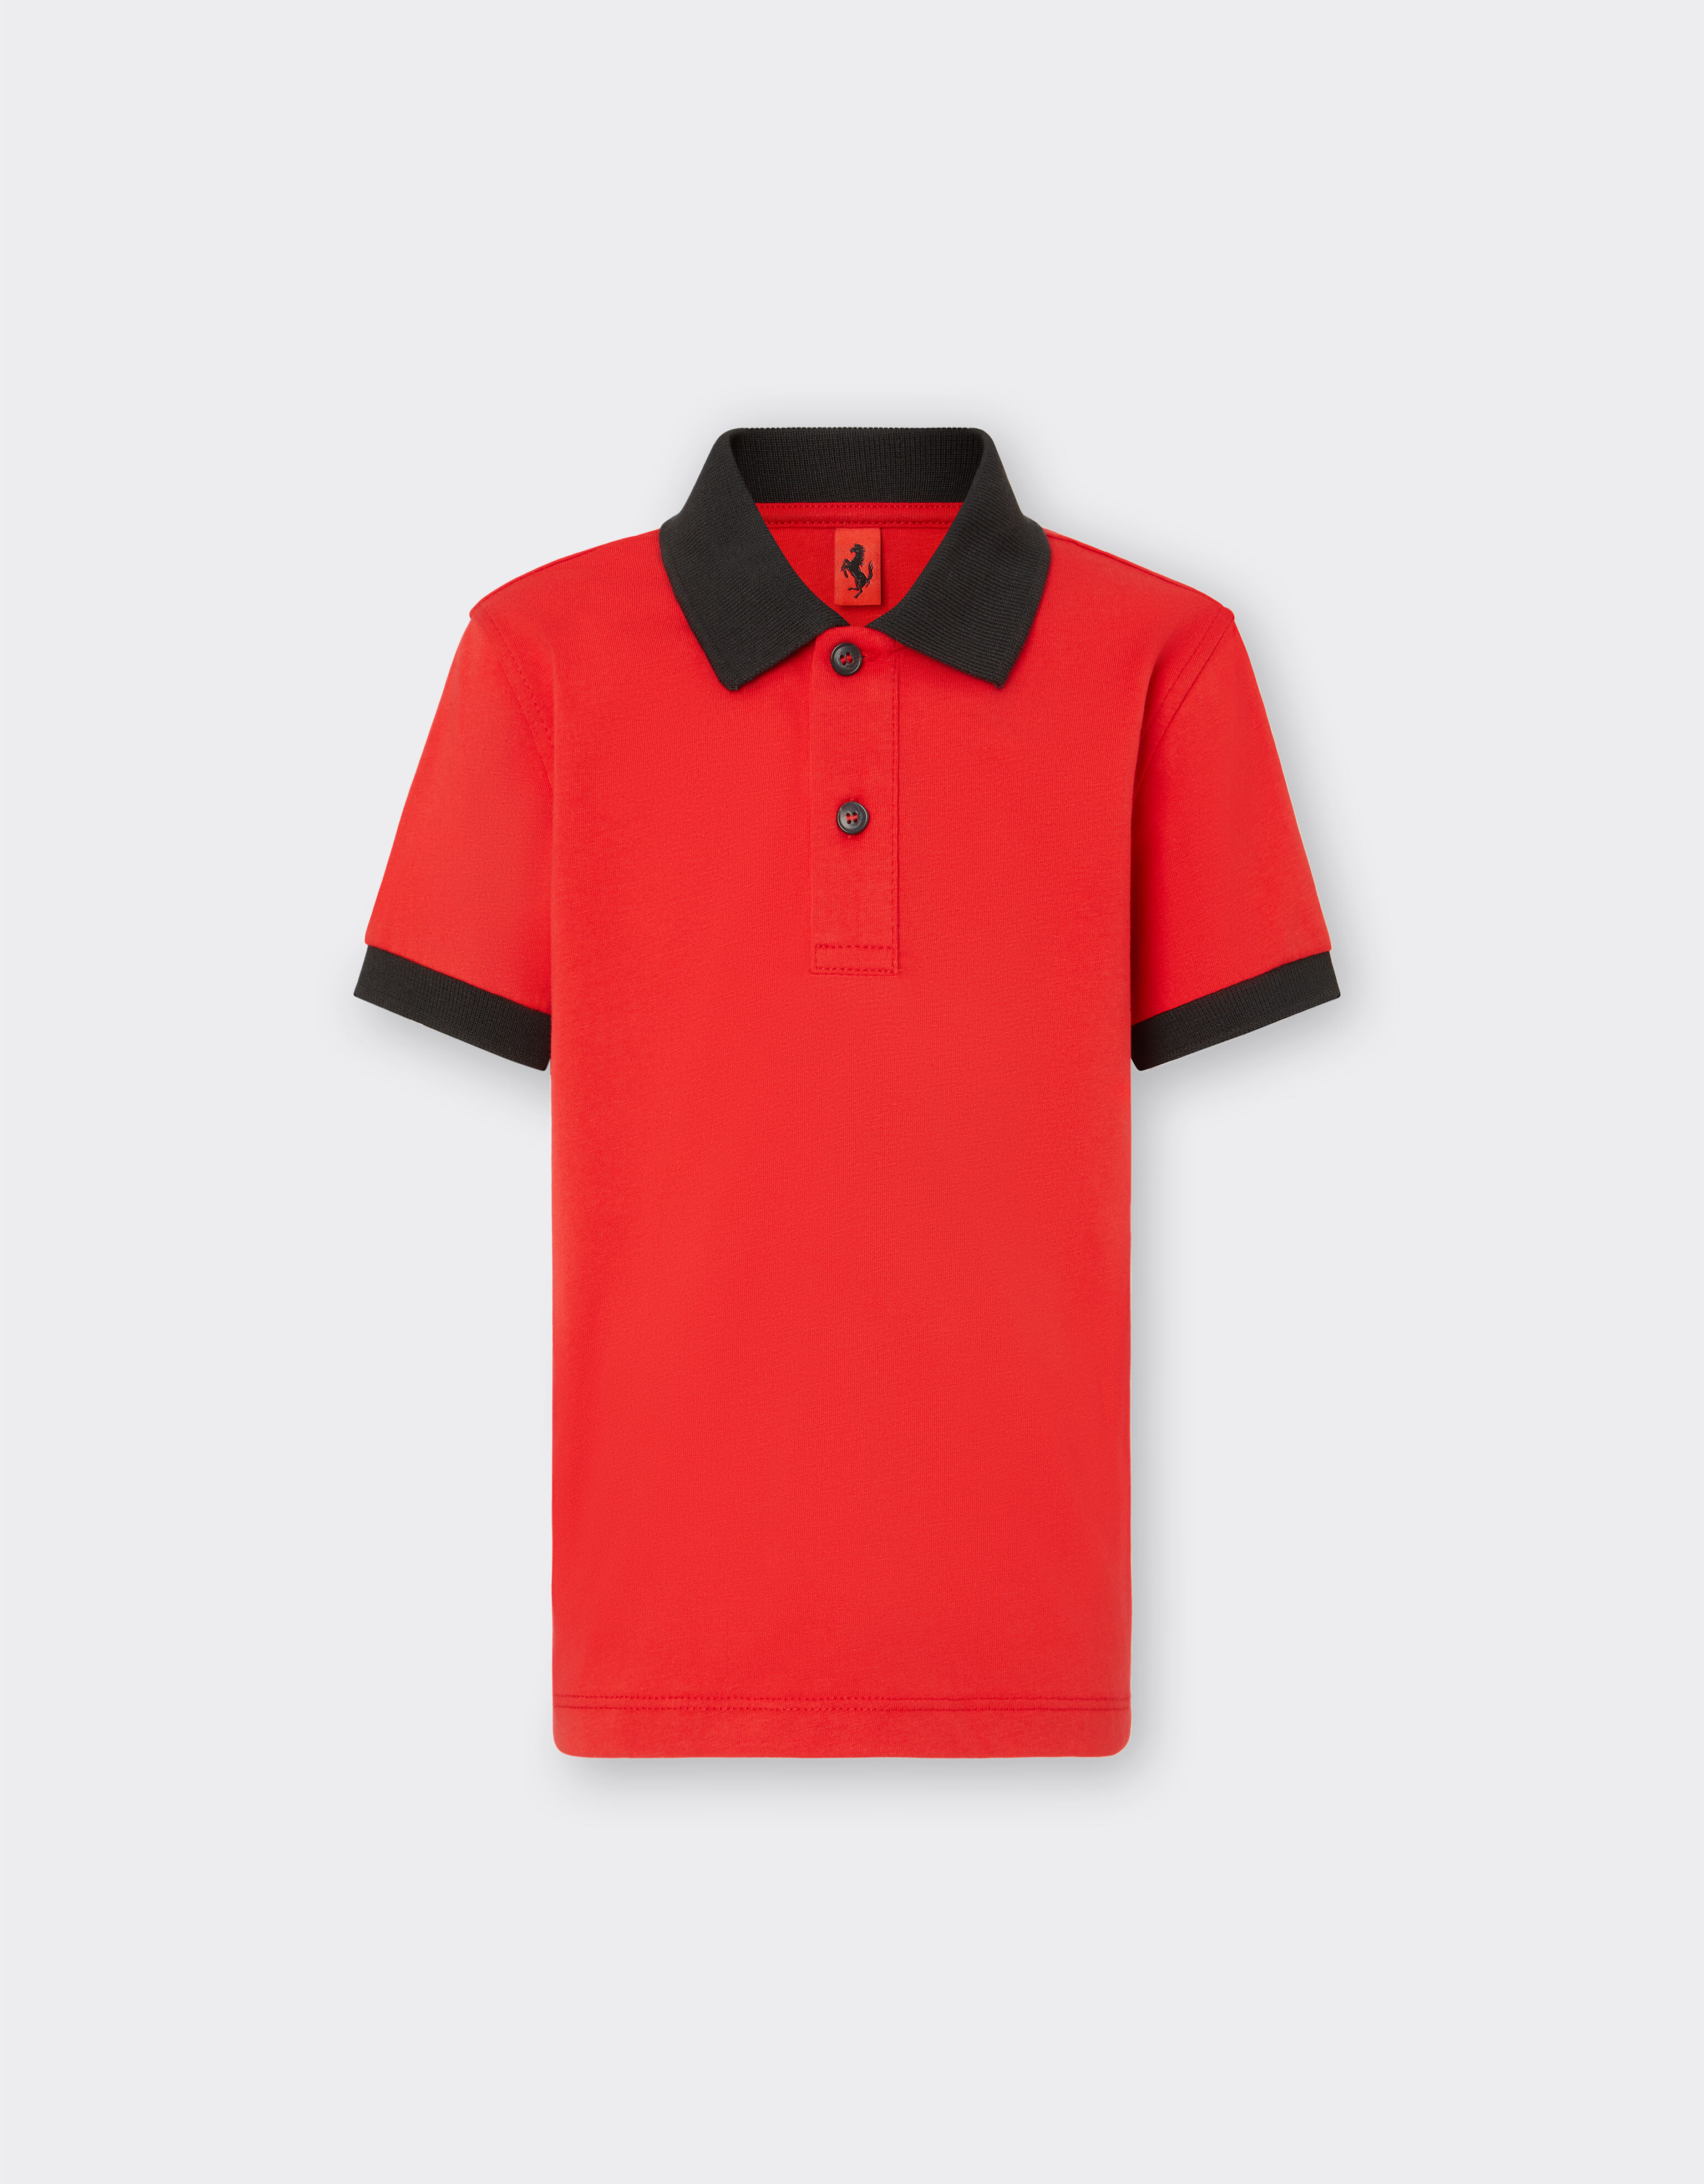 Ferrari Short sleeves - Contrast collar and cuffs - Front buttoning Rosso Corsa 20162fK